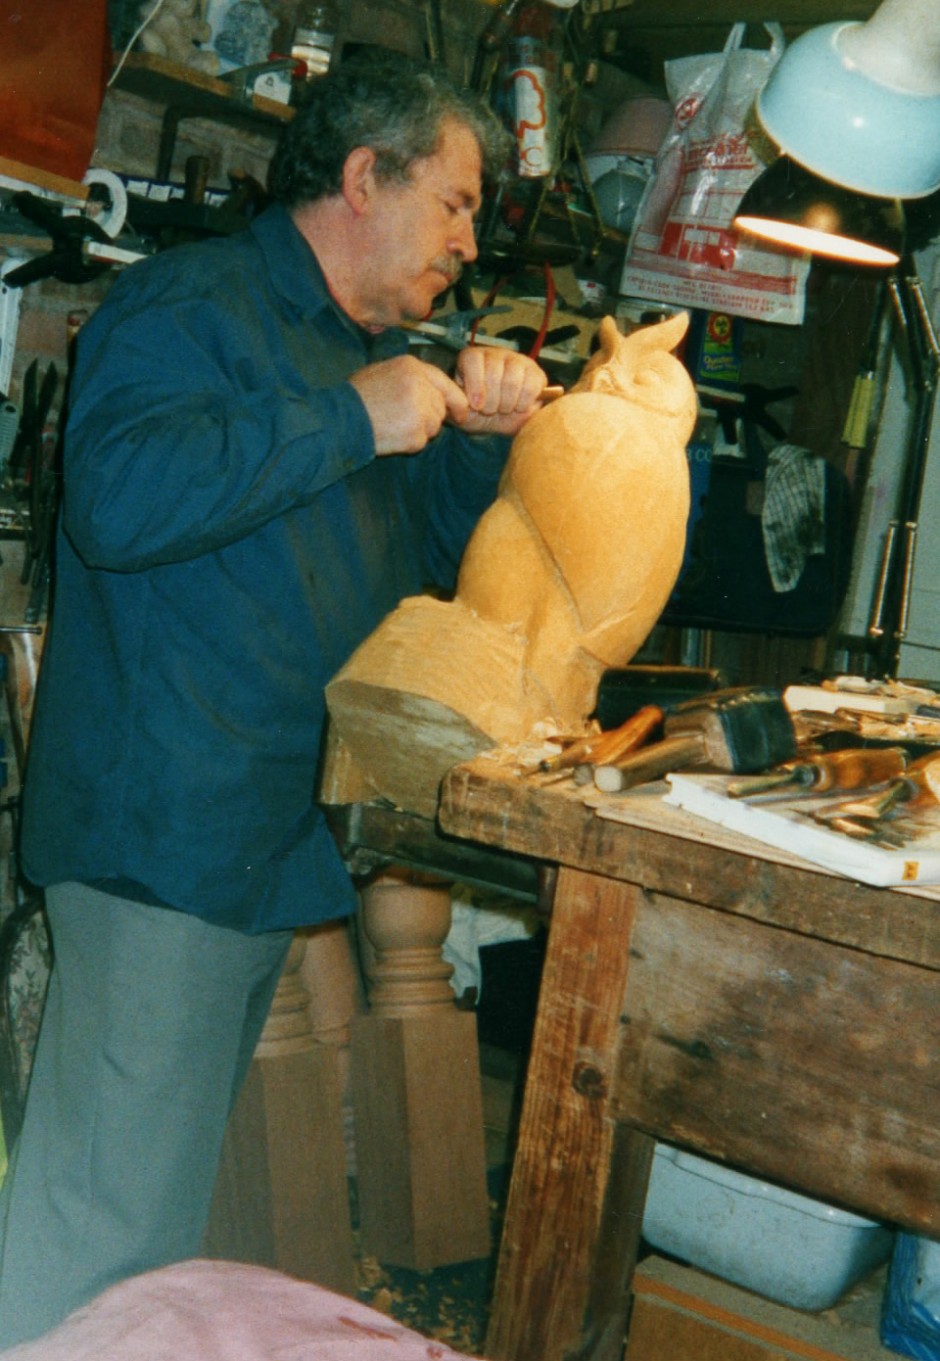 Jose at work on the owl - jose carving, owl, long eared, jose at work